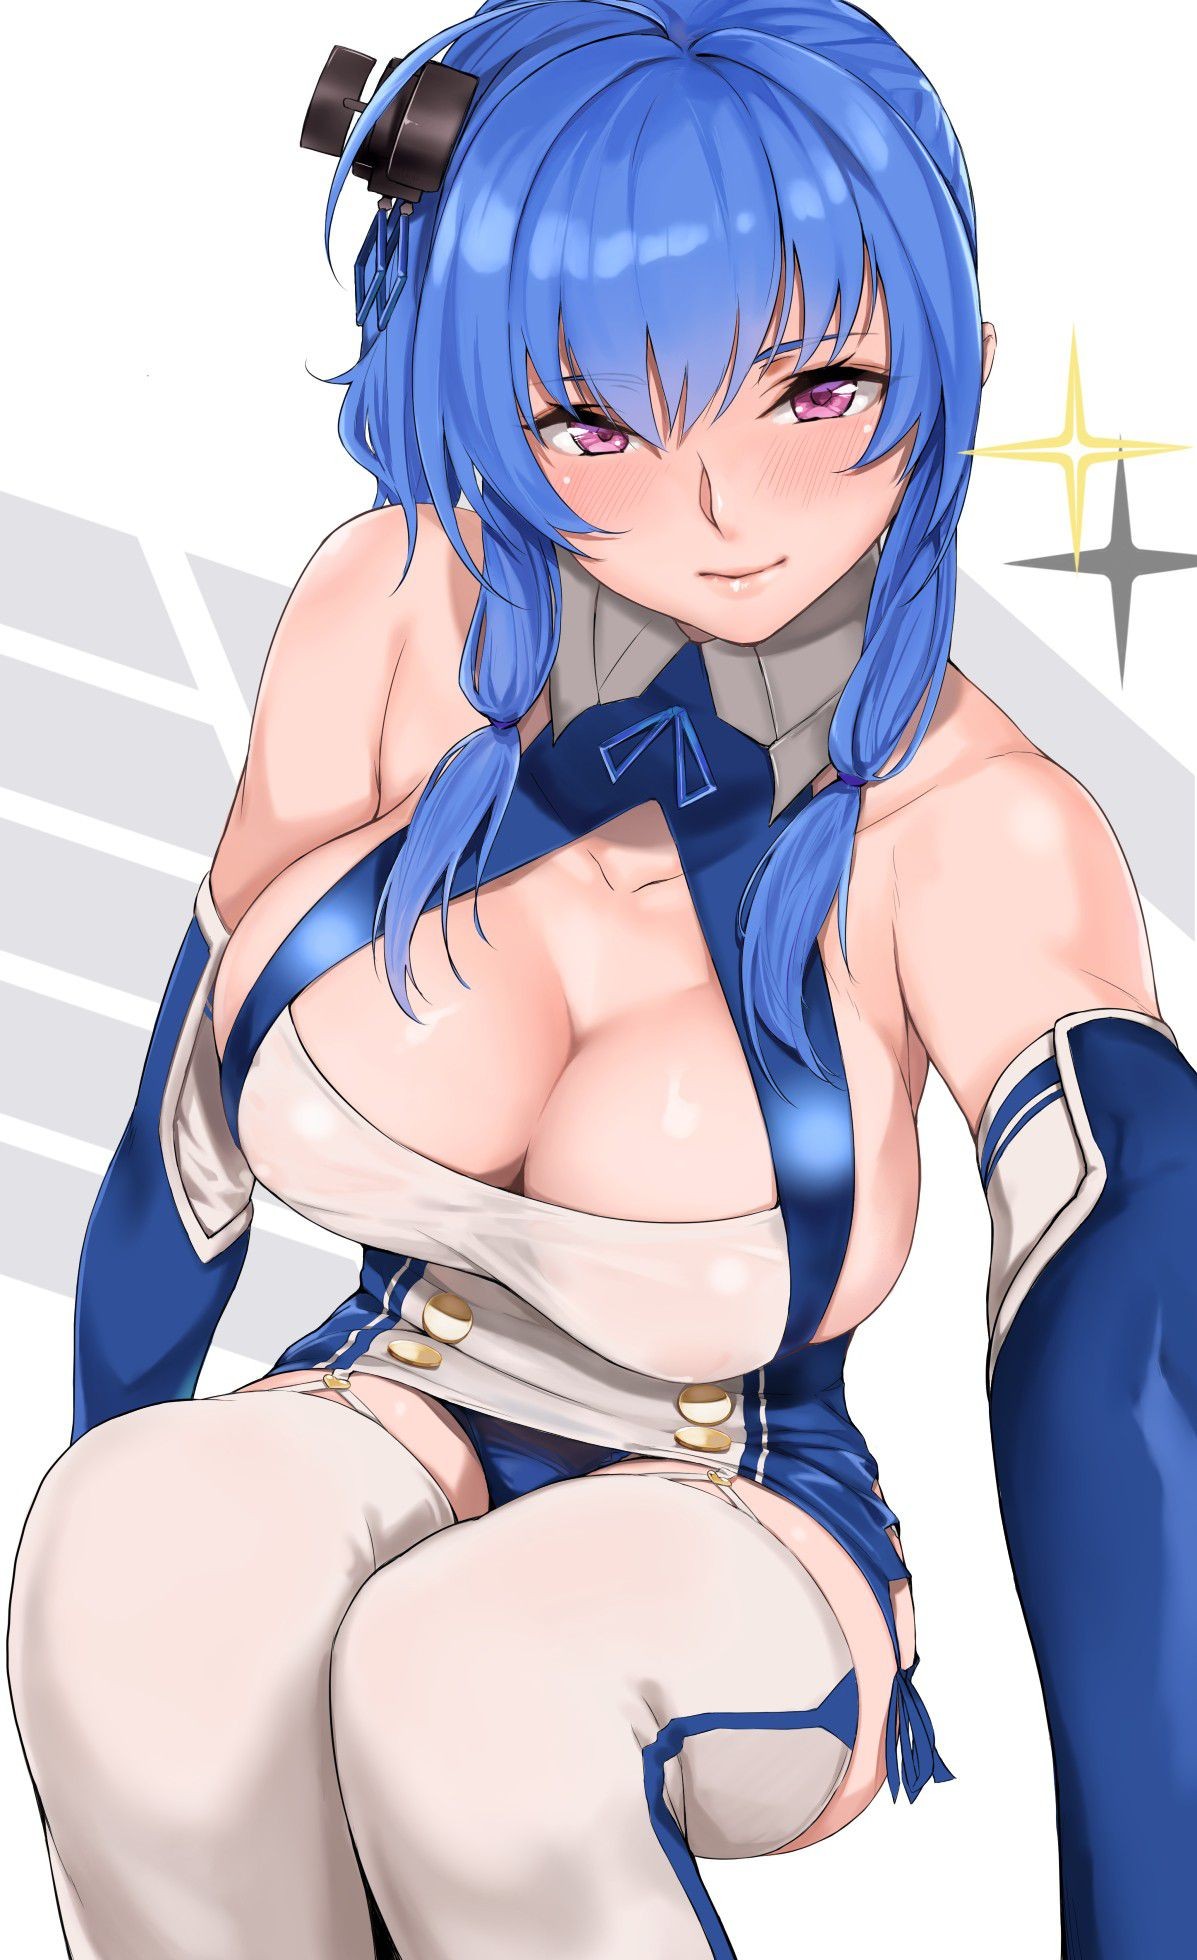 Blowjob Contest Two-dimensional Erotic Image Of St. Louis Of Azur Lane Who Wants To Call It St. Louis Unintentionally Costume